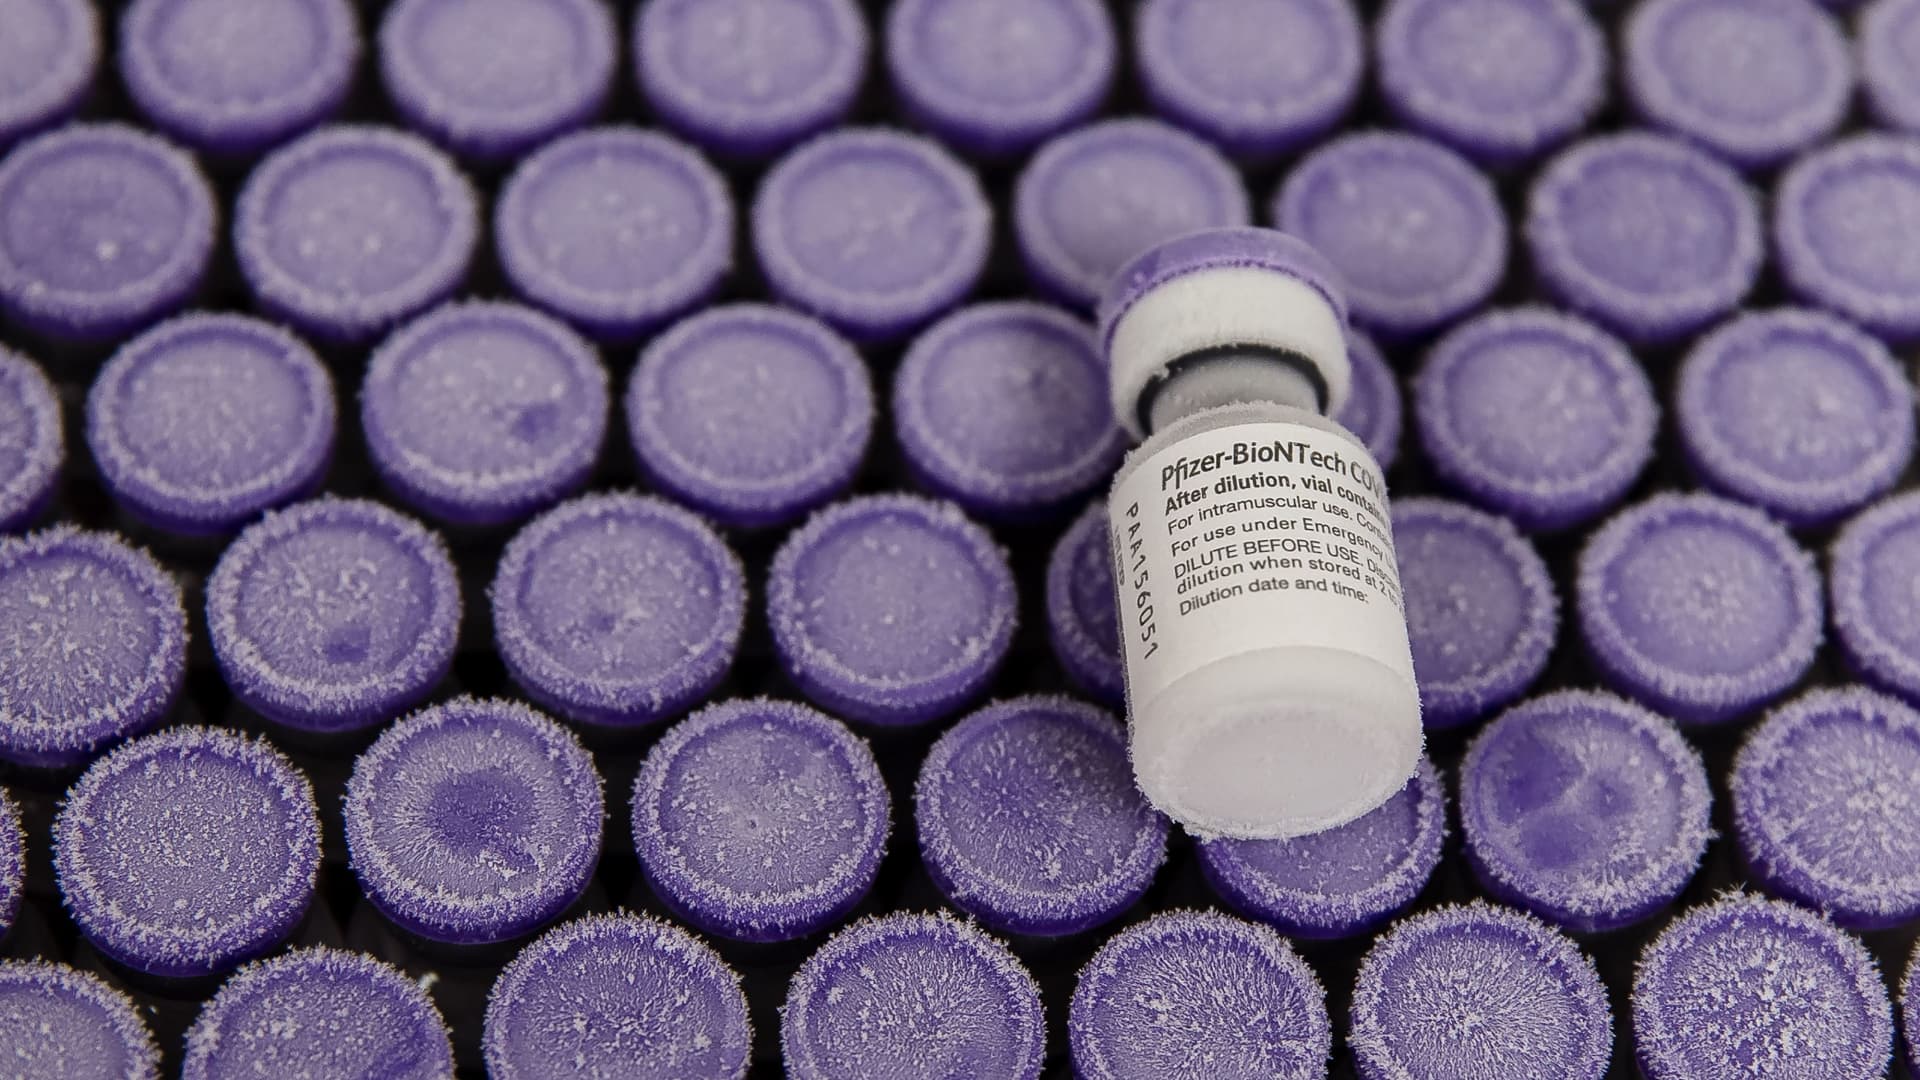 Pfizer's Covid-19 vaccine is pictured at Rady Children's Hospital before it's placed back in the refrigerator in San Diego, California on December 15, 2020.